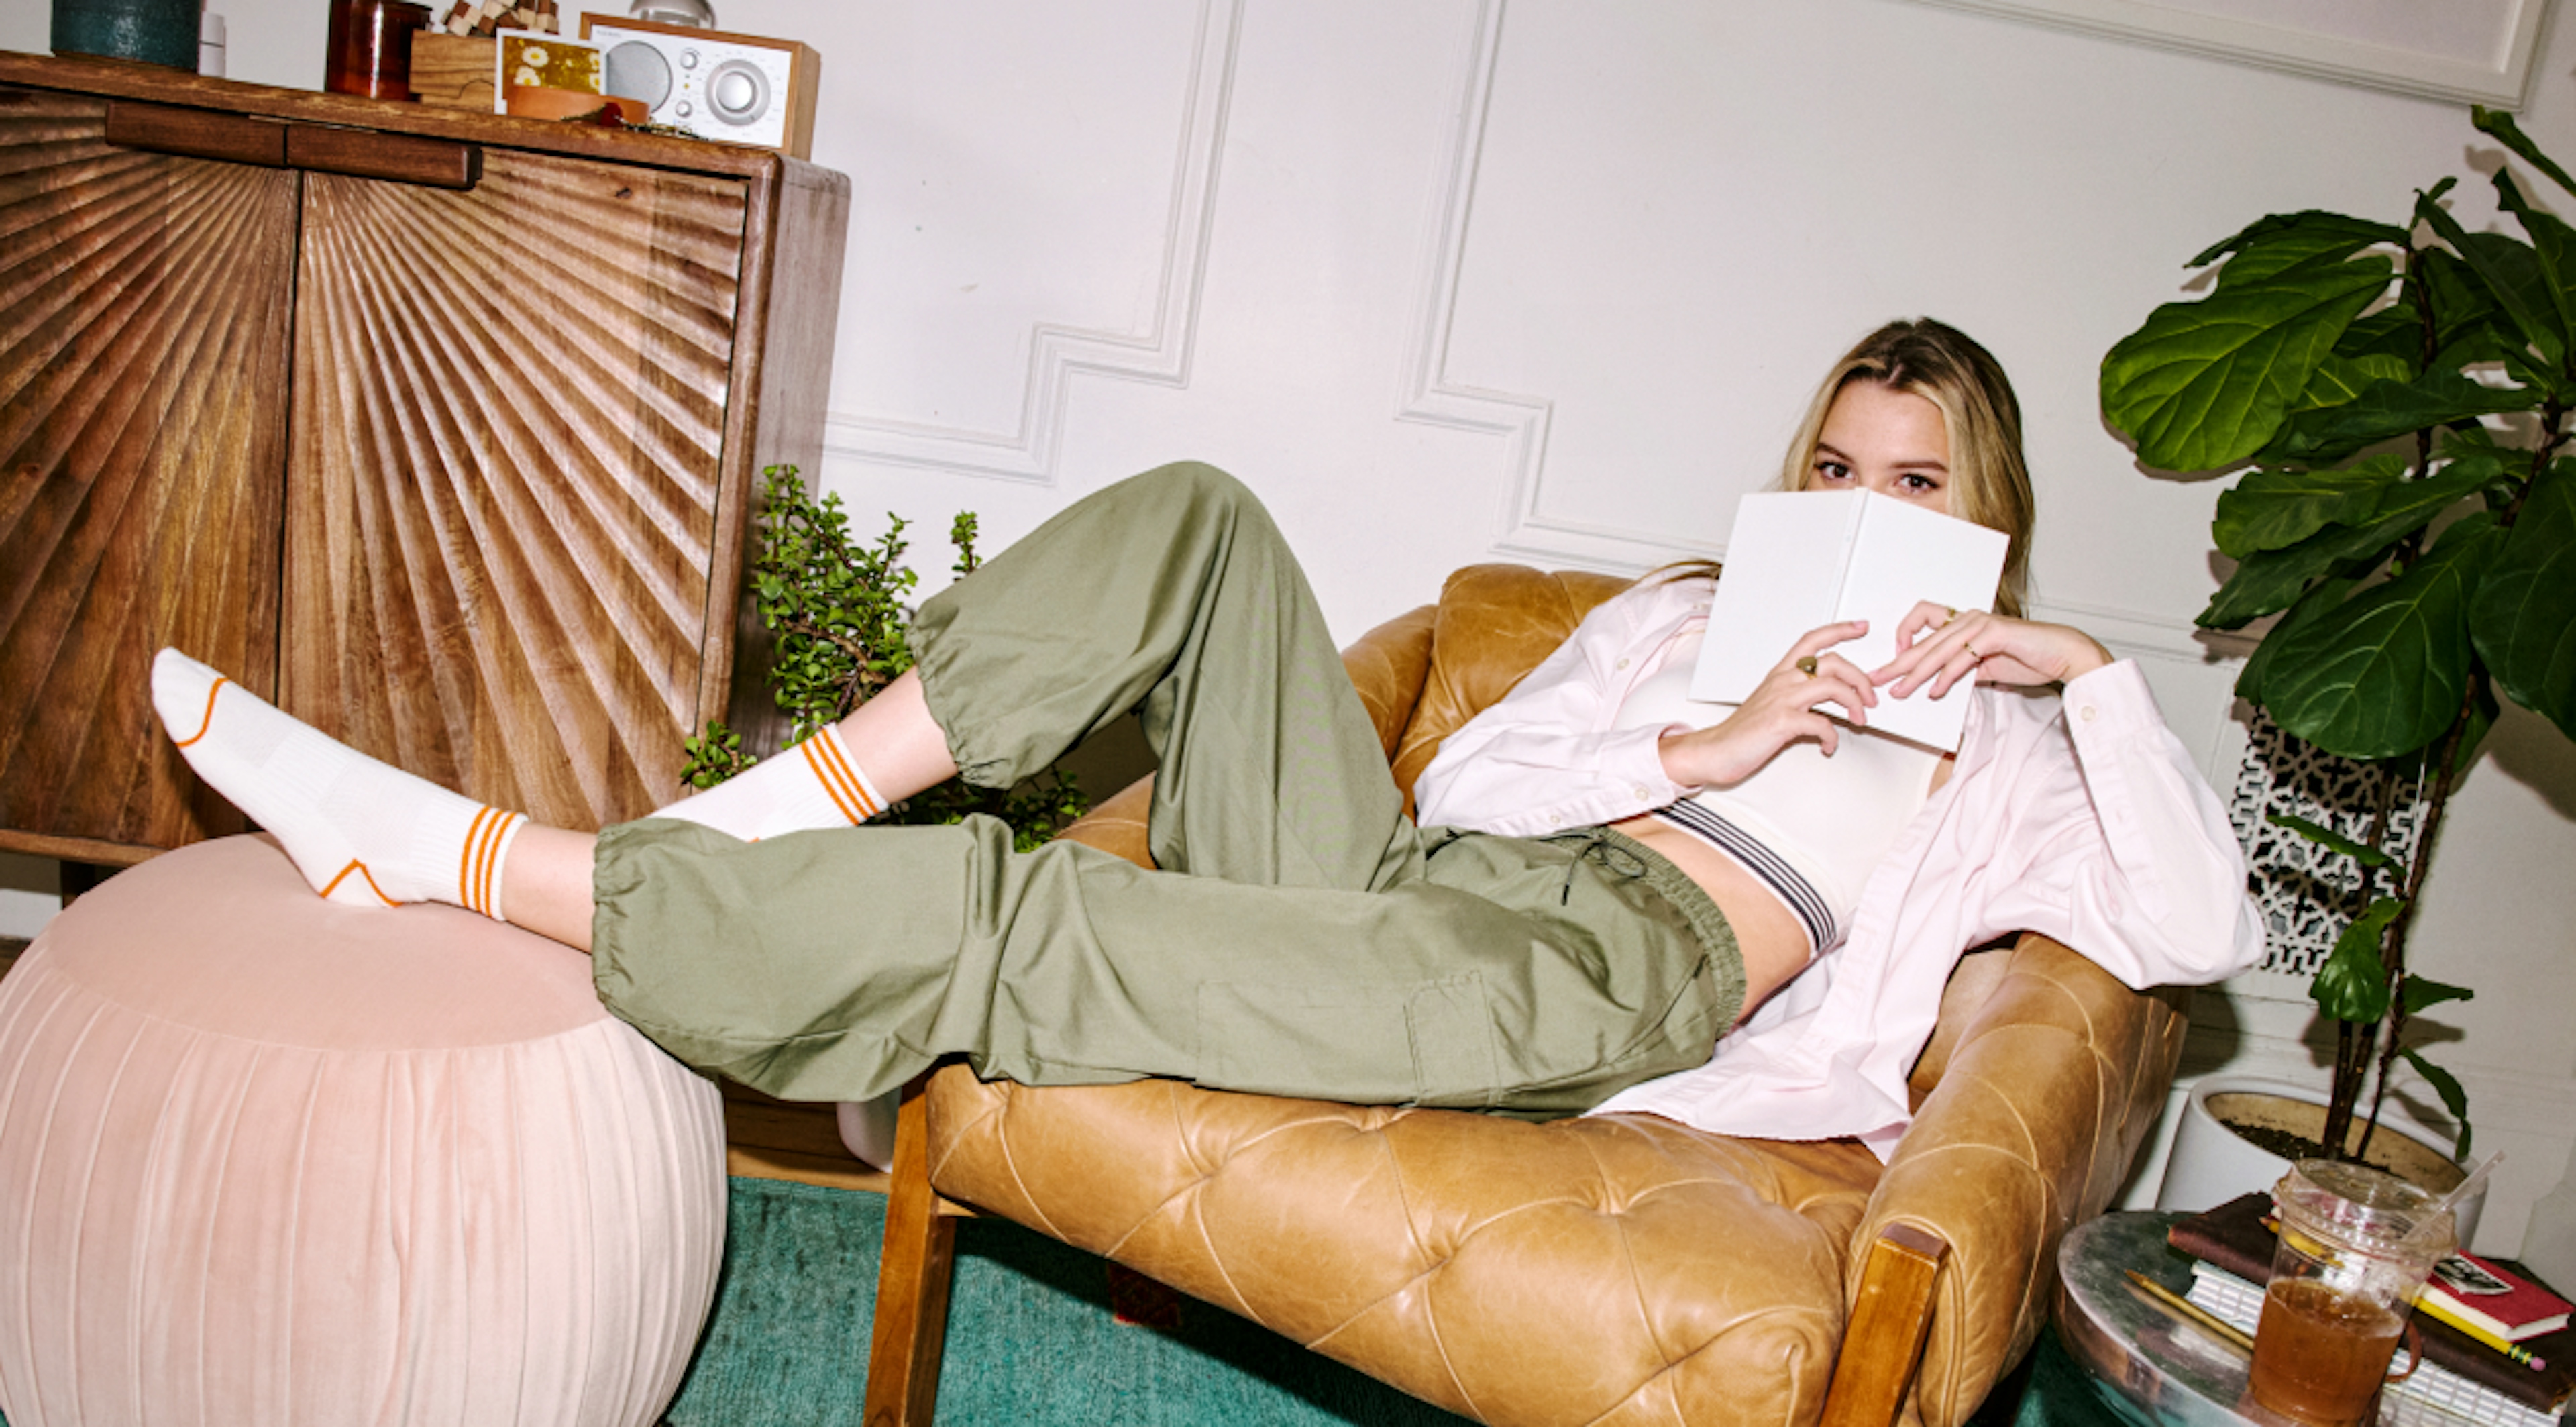 The image shows a young lady sitting very relaxed on a leather armchair in her living room at home. She is playfully hiding her face behind the book she is reading.